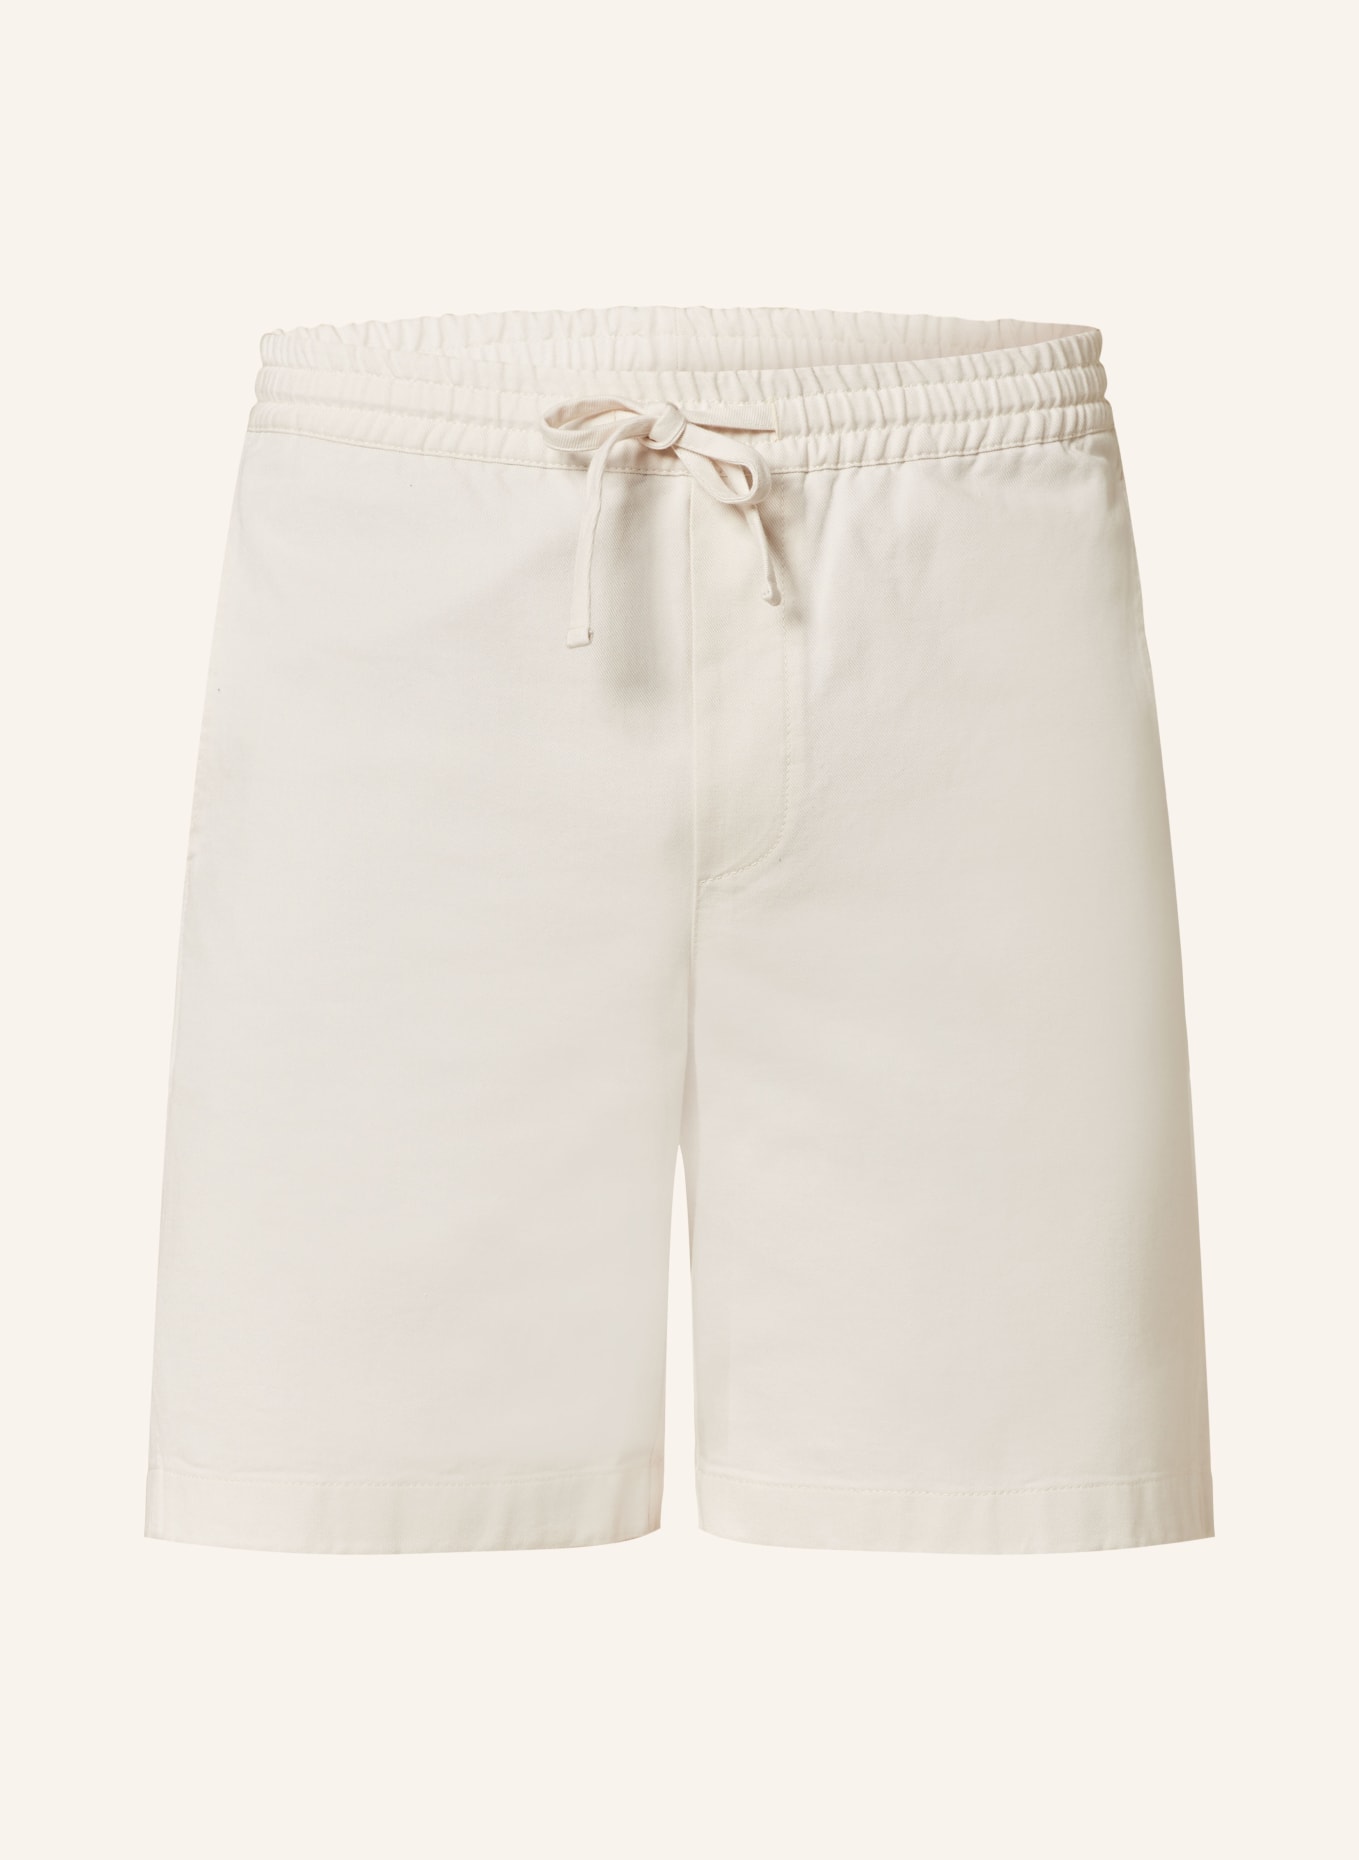 MAERZ MUENCHEN Shorts, Color: CREAM (Image 1)